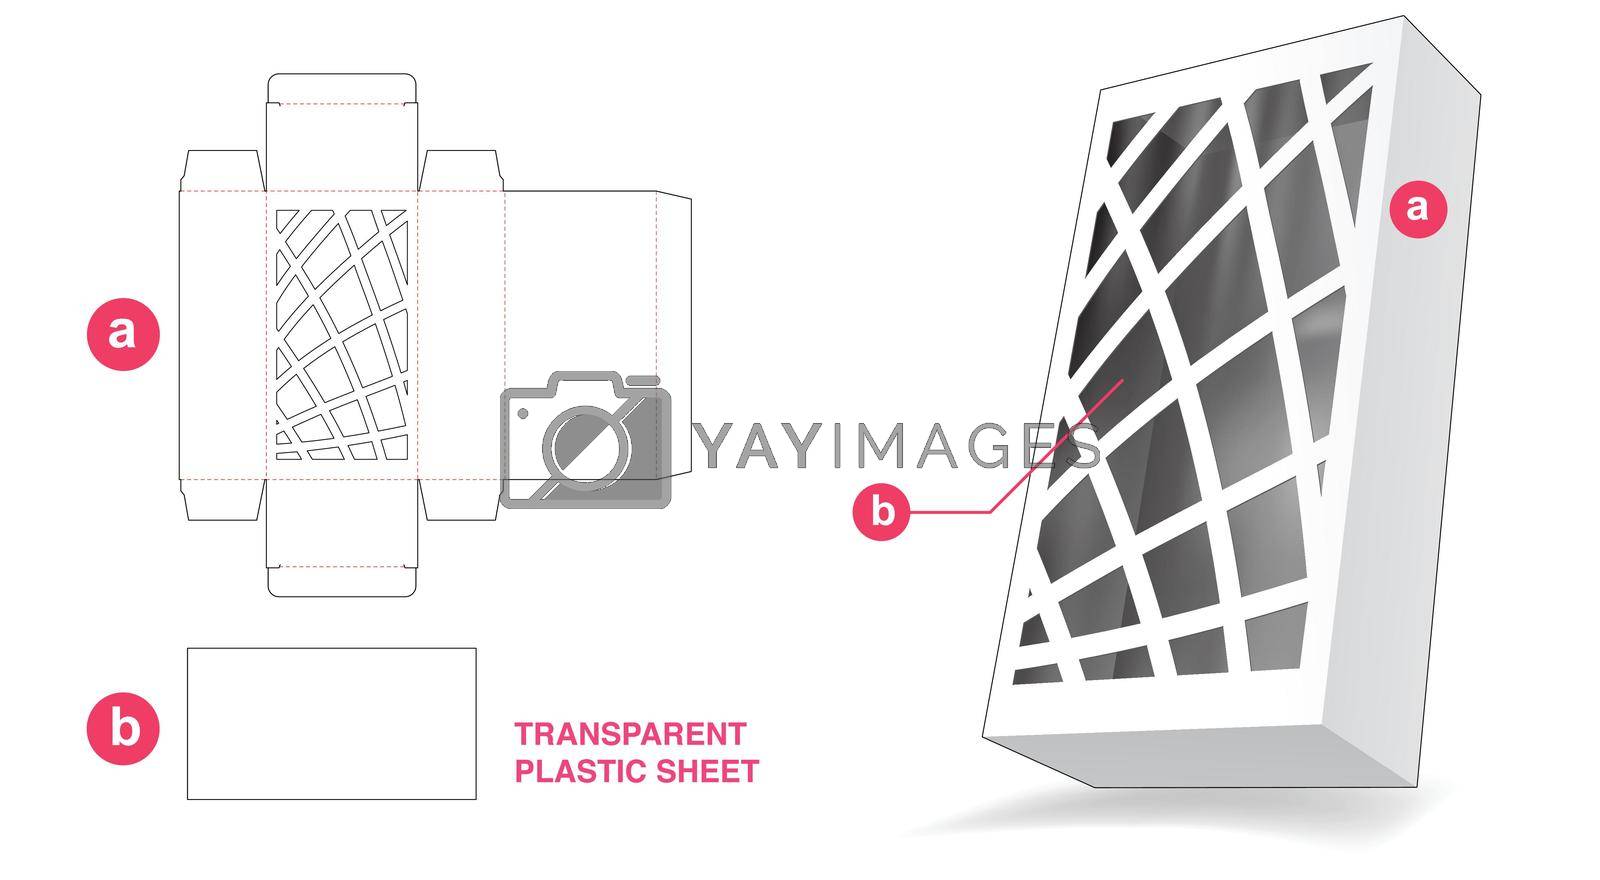 Royalty free image of Box with abstract window and transparent plastic sheet die cut template by valueinvestor